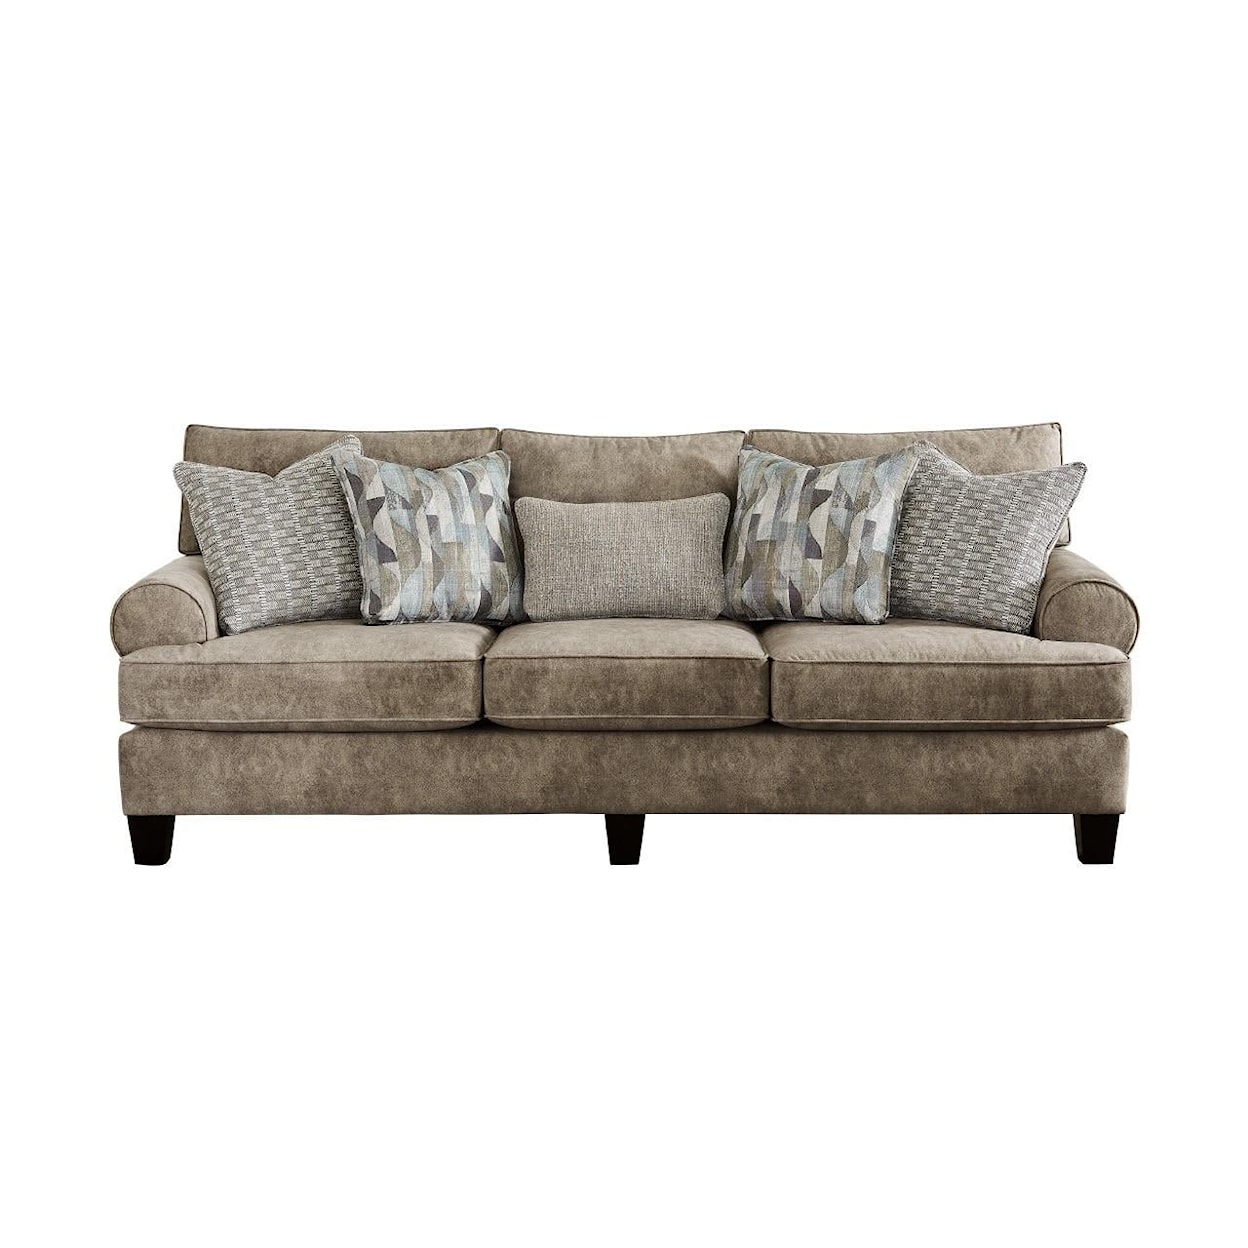 Fusion Furniture 4200 OUTLIER MUSHROOM Sofa with Rolled Arms and Exposed Wood Legs